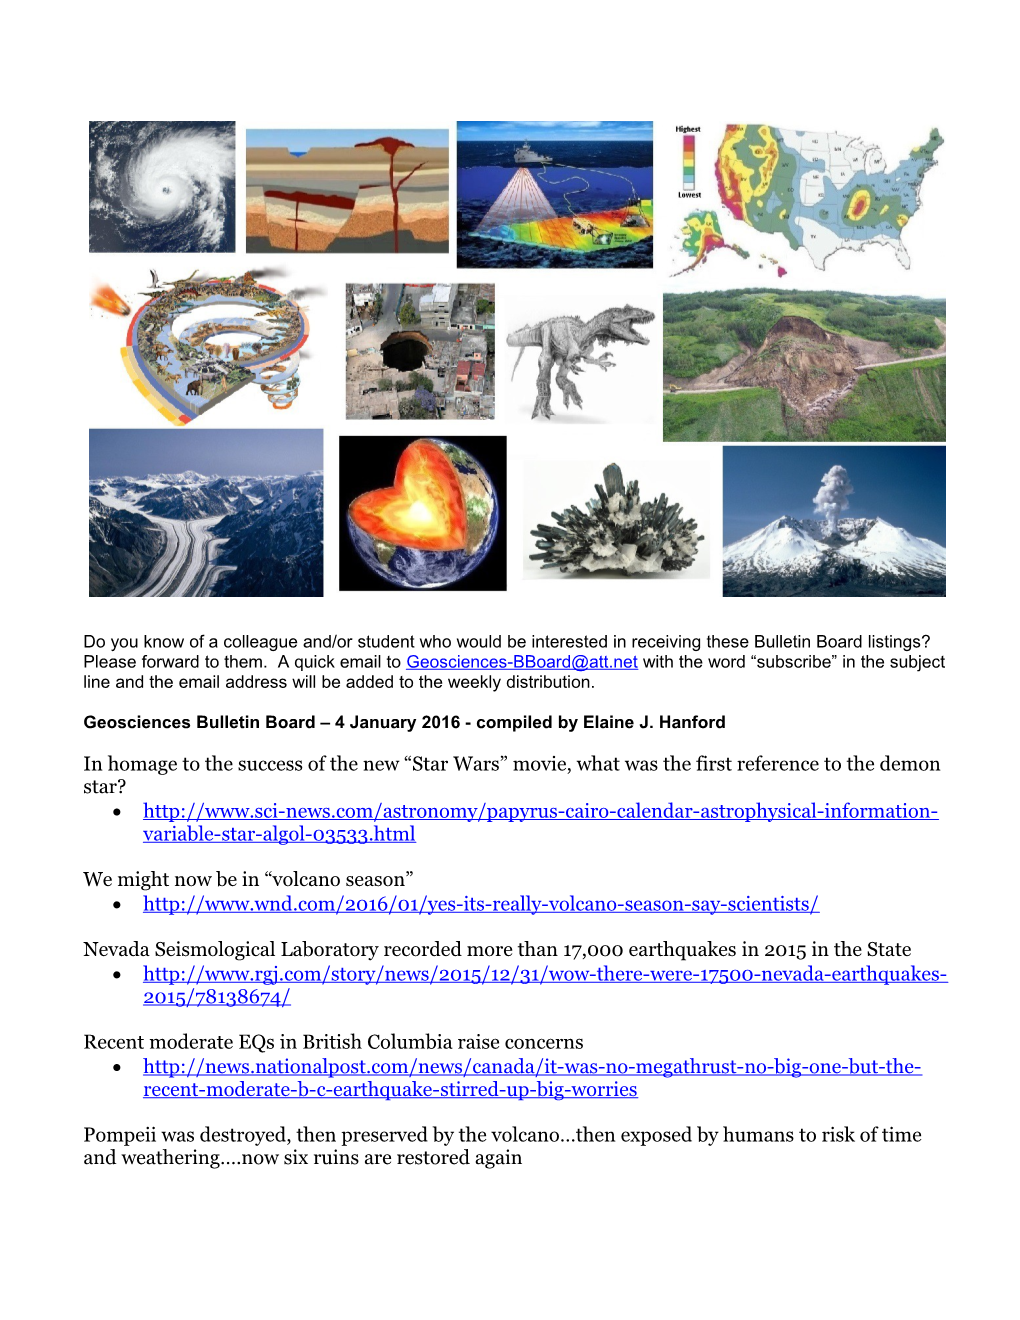 Geosciences Bulletin Board 4 January 2016- Compiled by Elaine J. Hanford